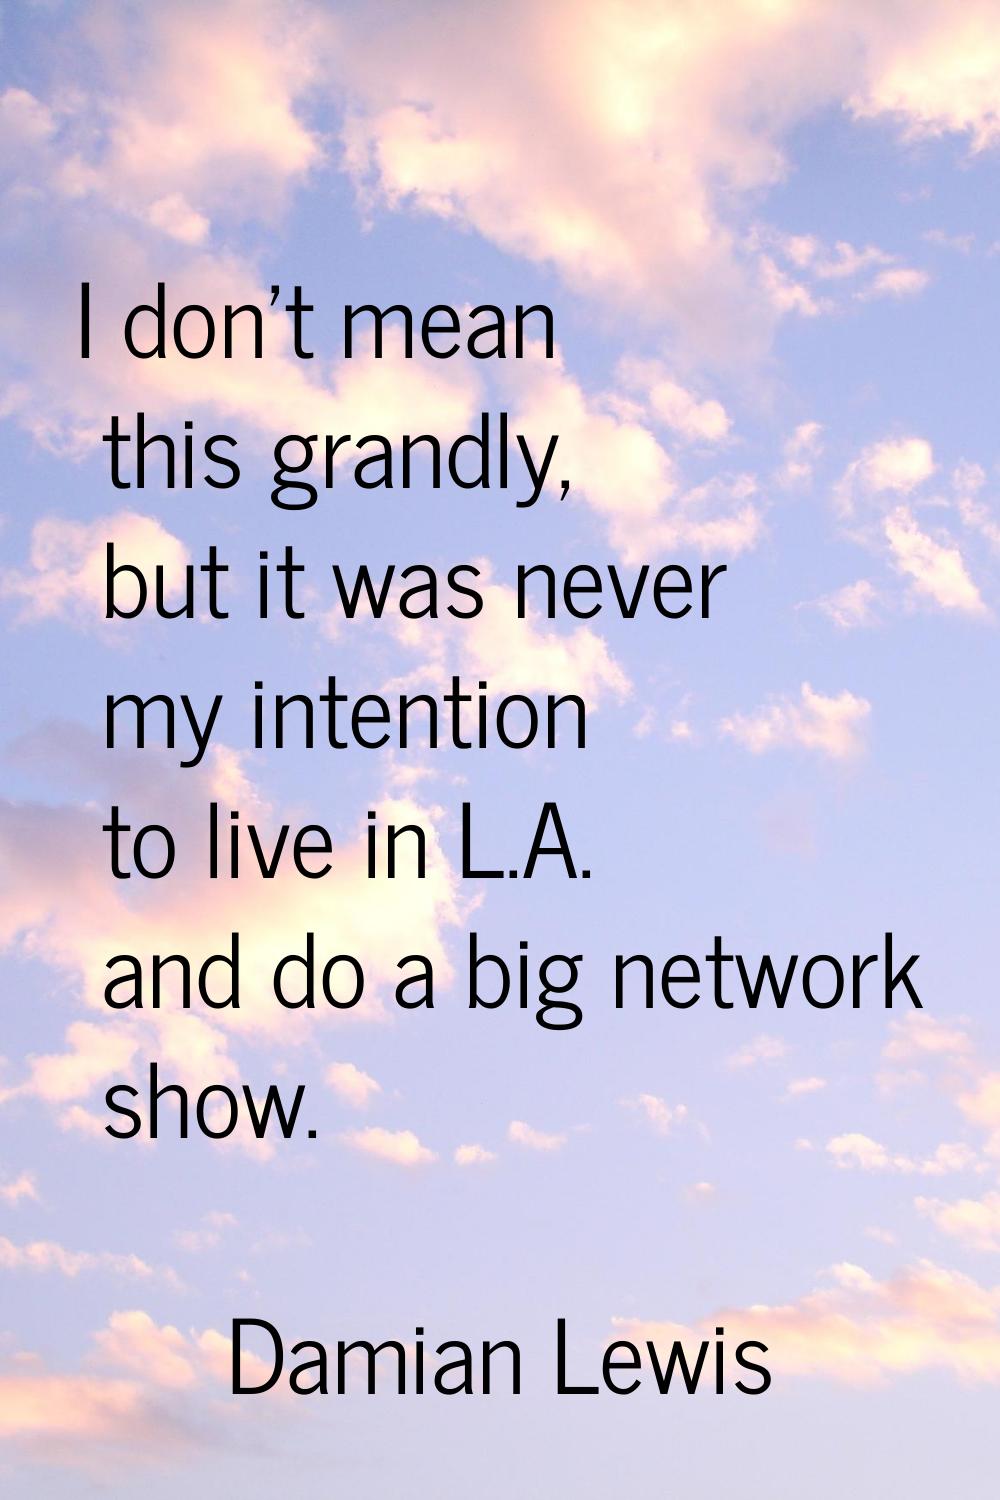 I don't mean this grandly, but it was never my intention to live in L.A. and do a big network show.